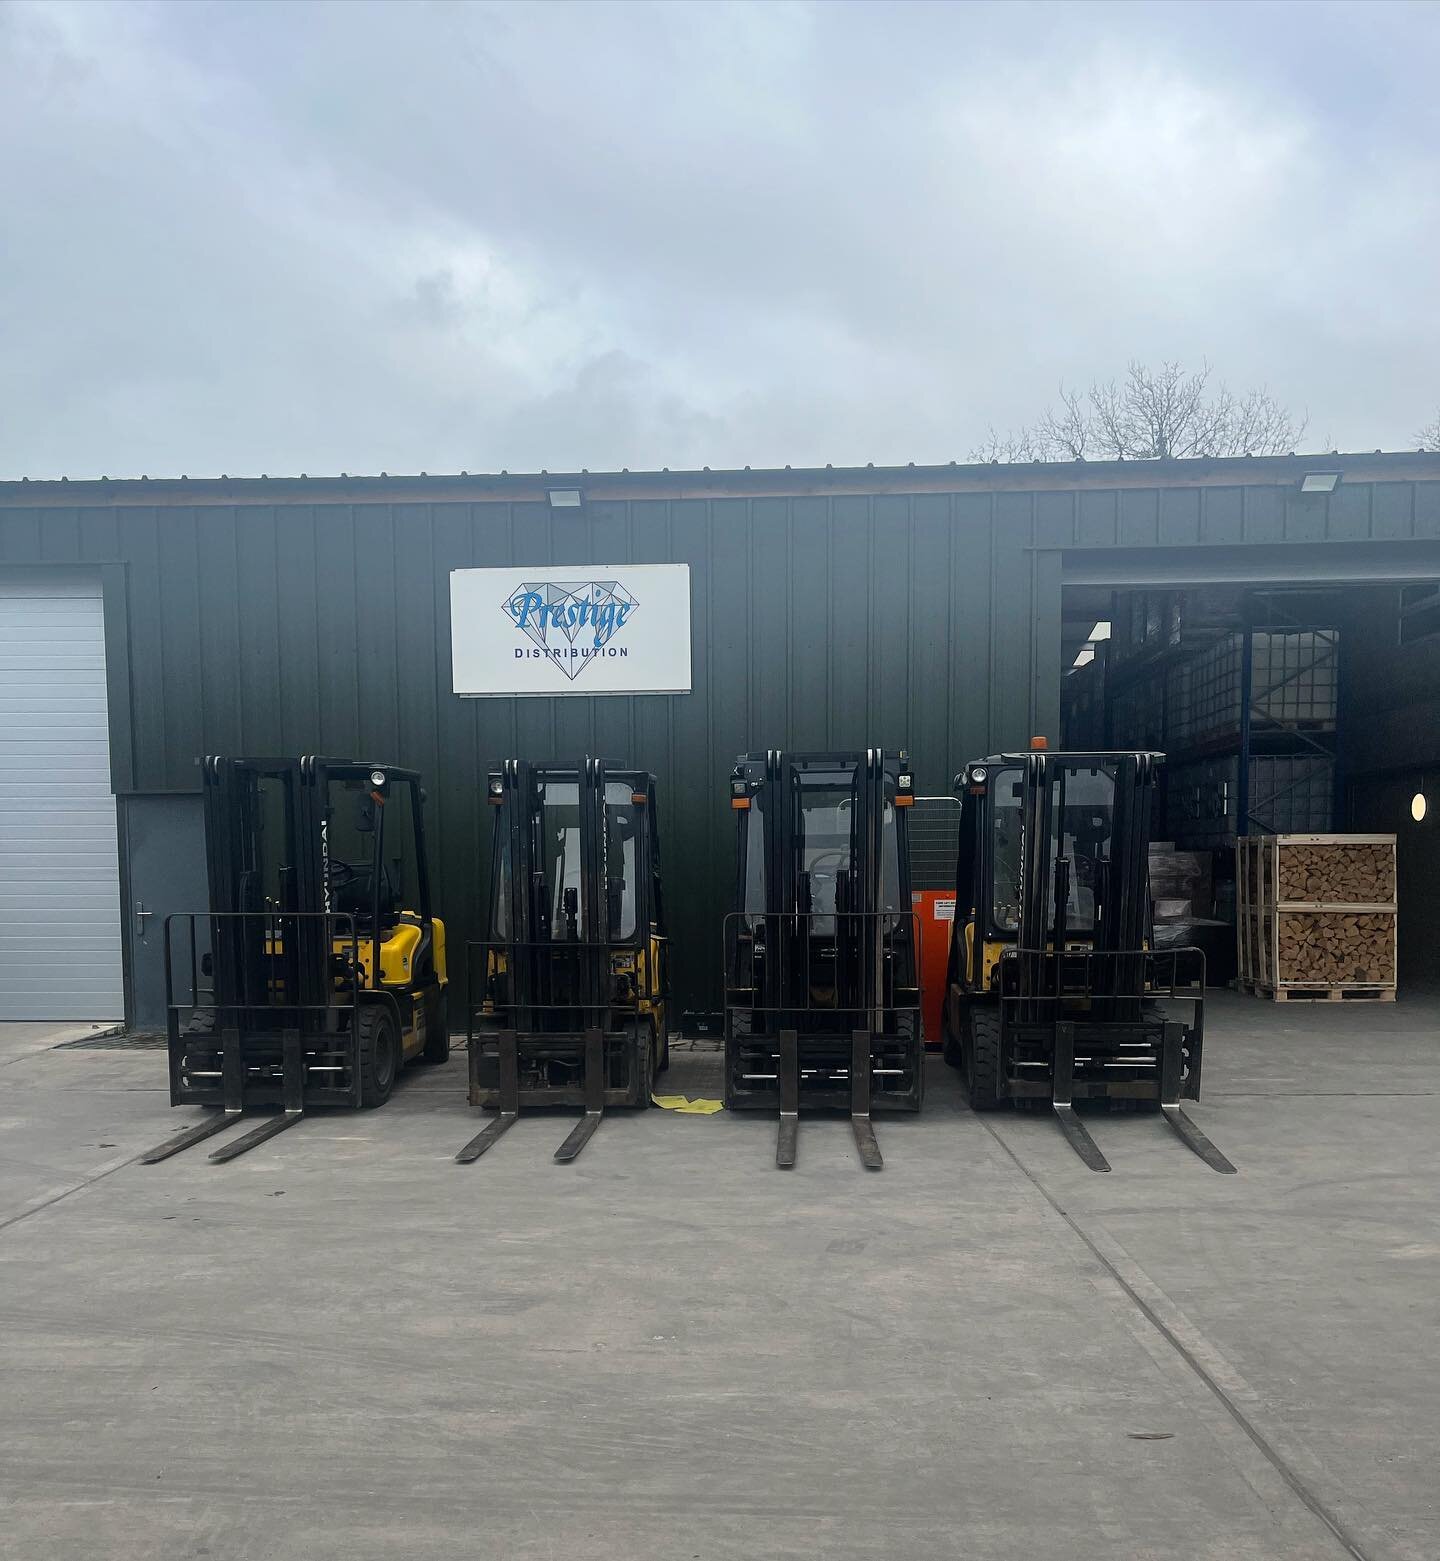 Small but Mighty 💪

Our forklifts are a massive part of our daily operations &hellip; buzzing around the yard loading &amp; unloading vehicles all day long! 🚛

Our biggest forklift truck can lift a whopping 2500kg and has built in weighing scales ?